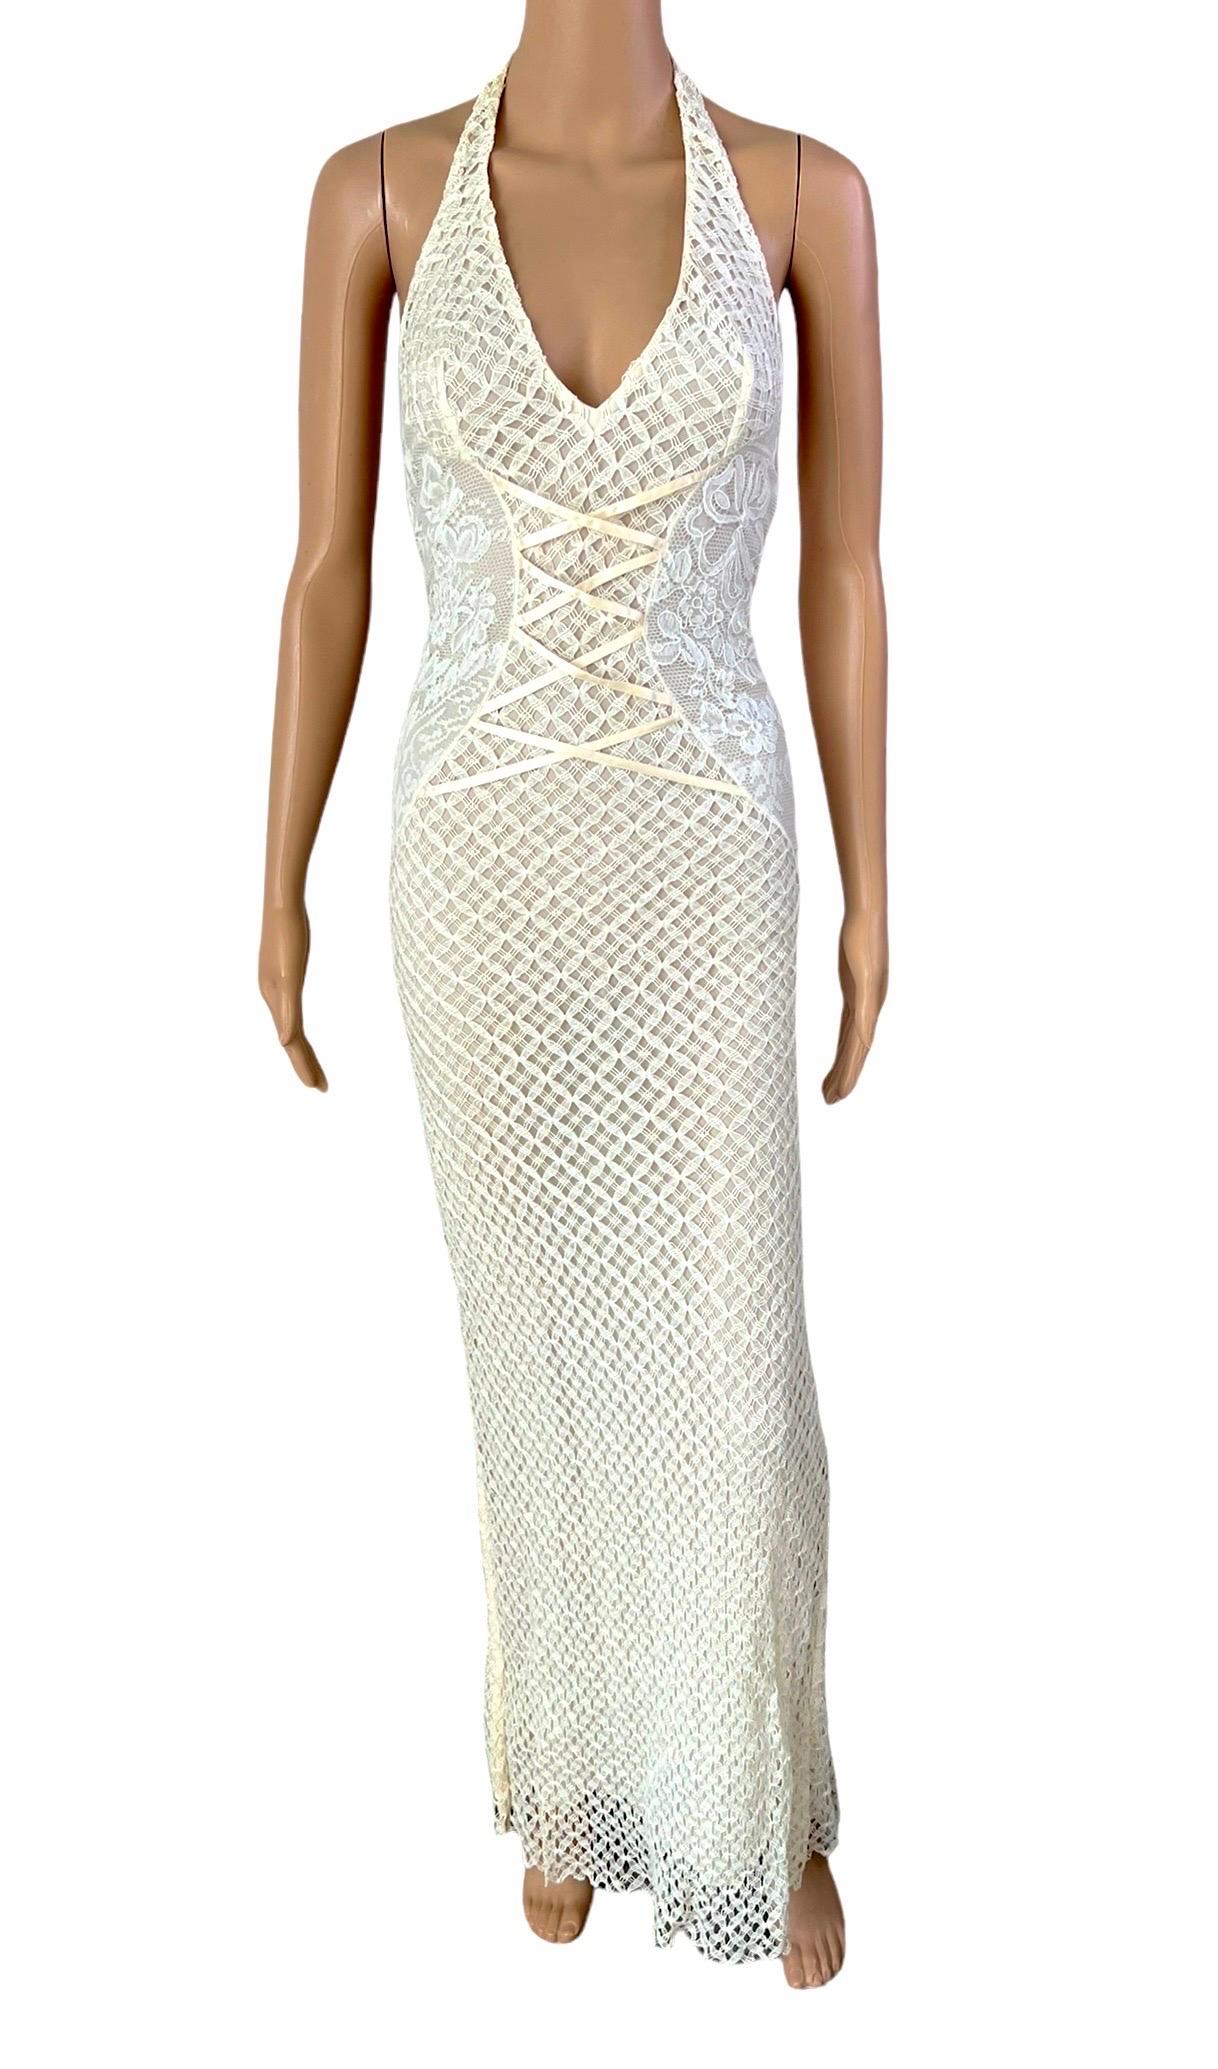 Gianni Versace S/S 2002 Plunging Neckline Halter Backless Semi Sheer Corset Lace Up Ivory Dress Gown IT 40